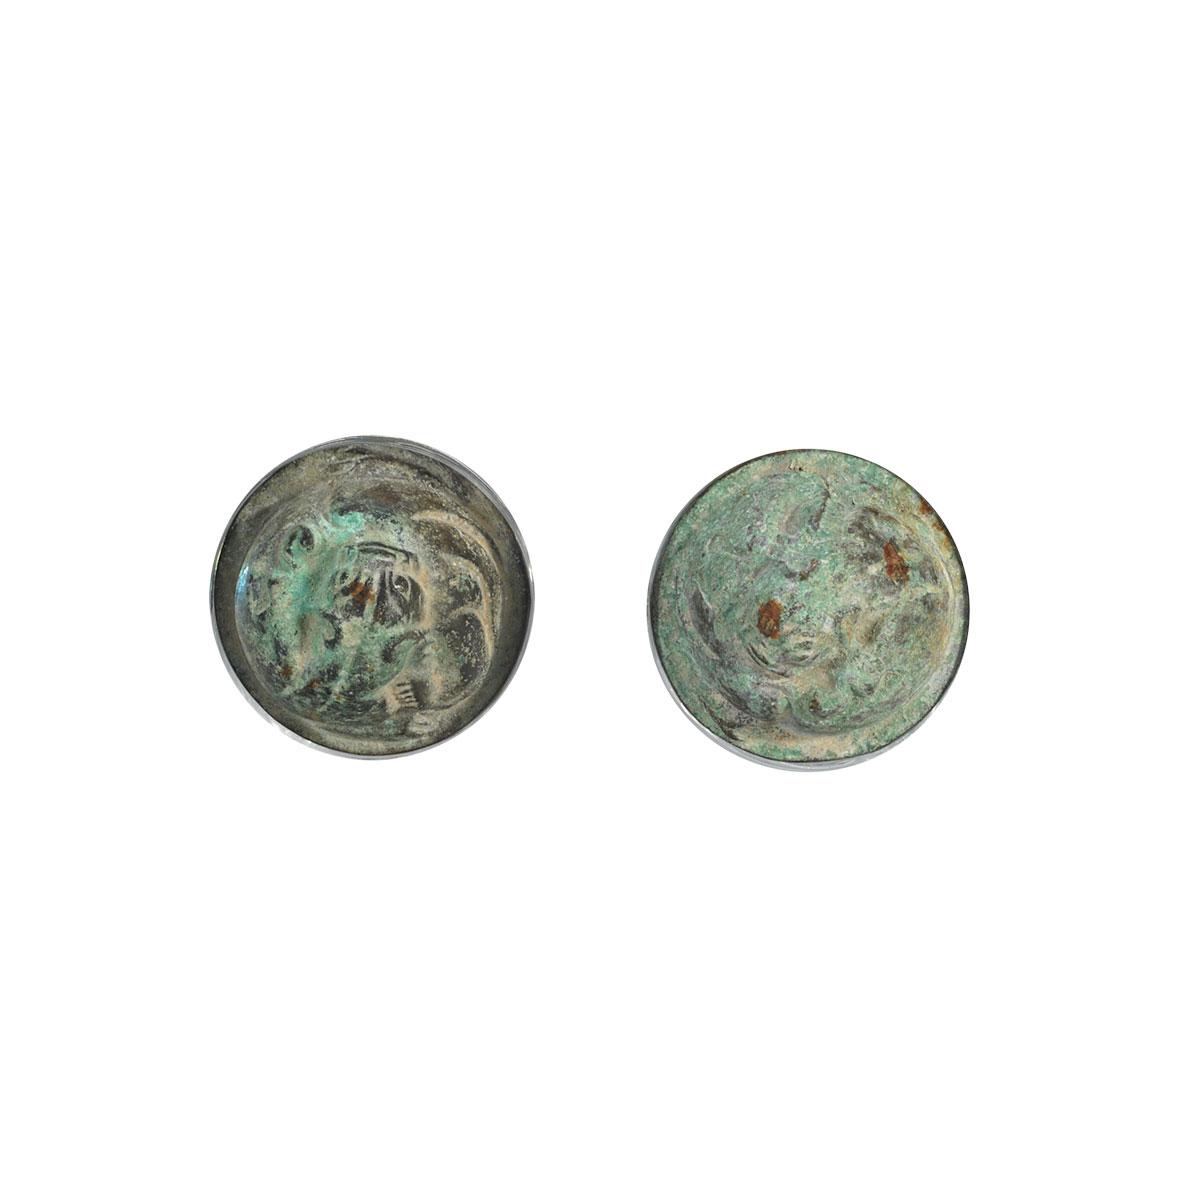 Pair of Bronze Harness Fittings, Warring States Period, 5th to 3rd Century BC